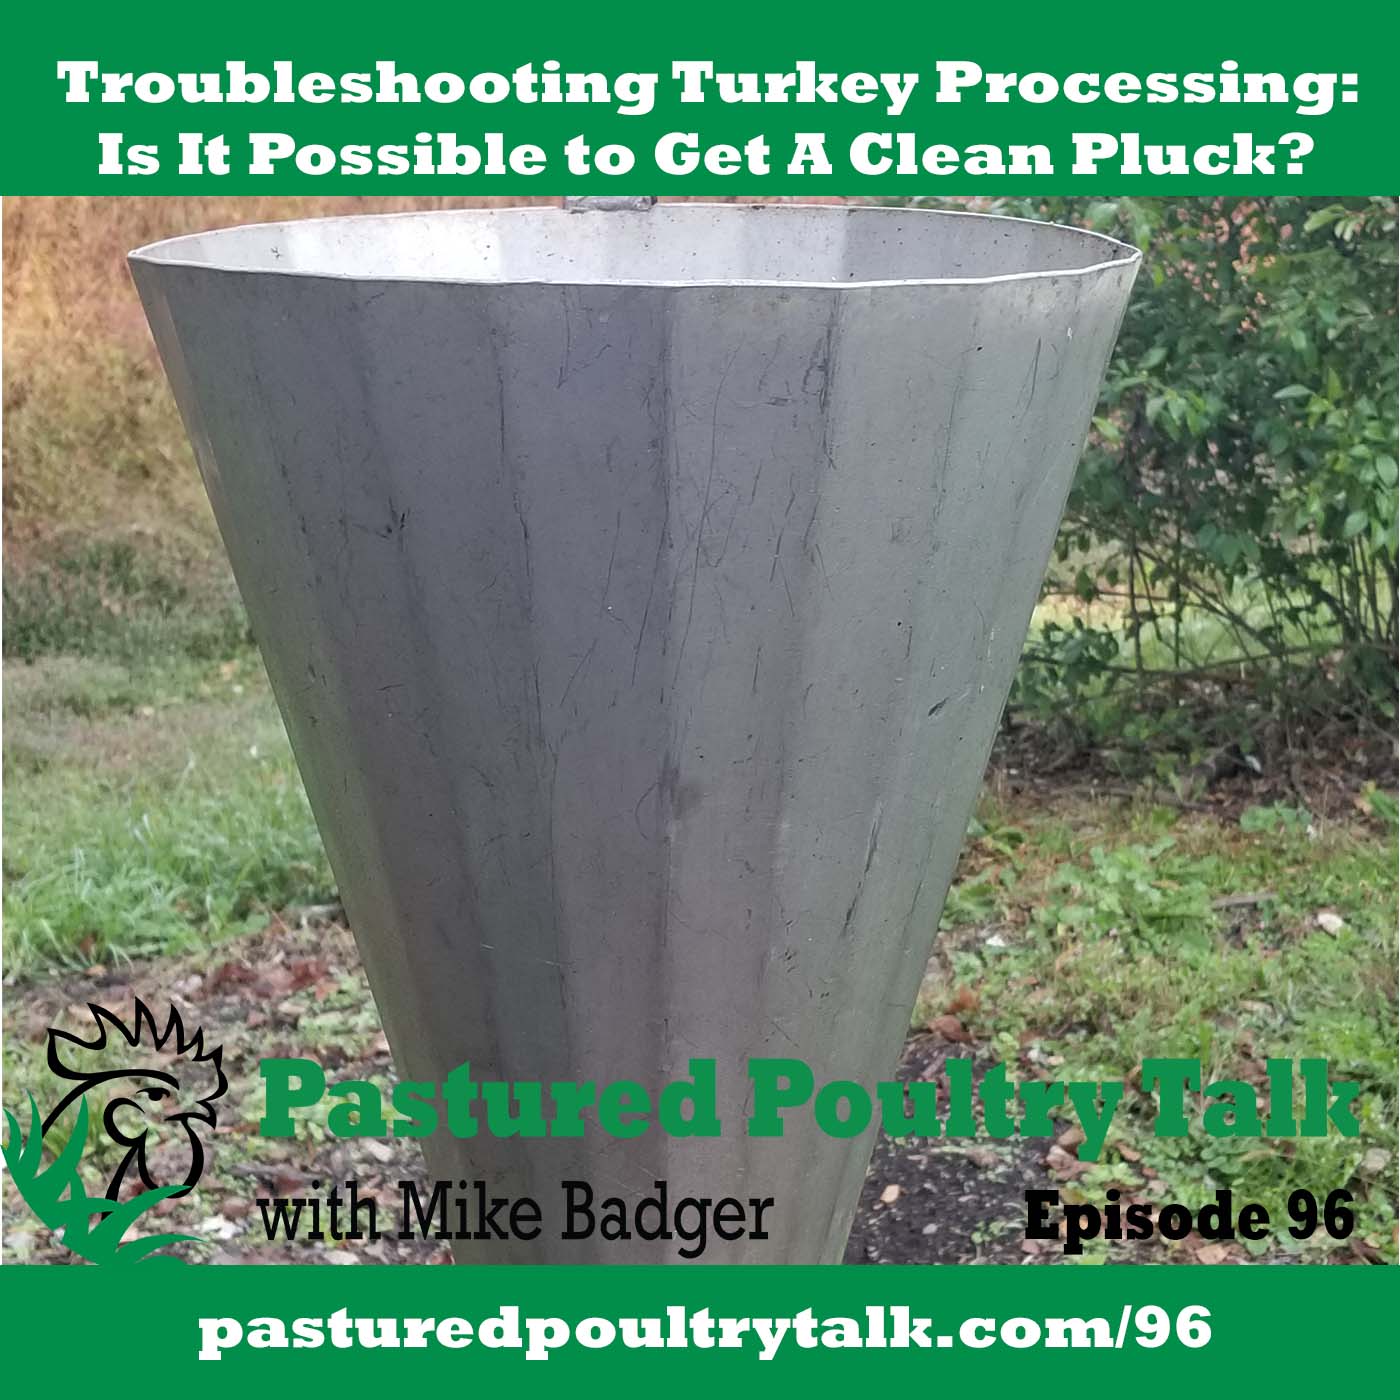 episode art for troubleshooting turkey processing.